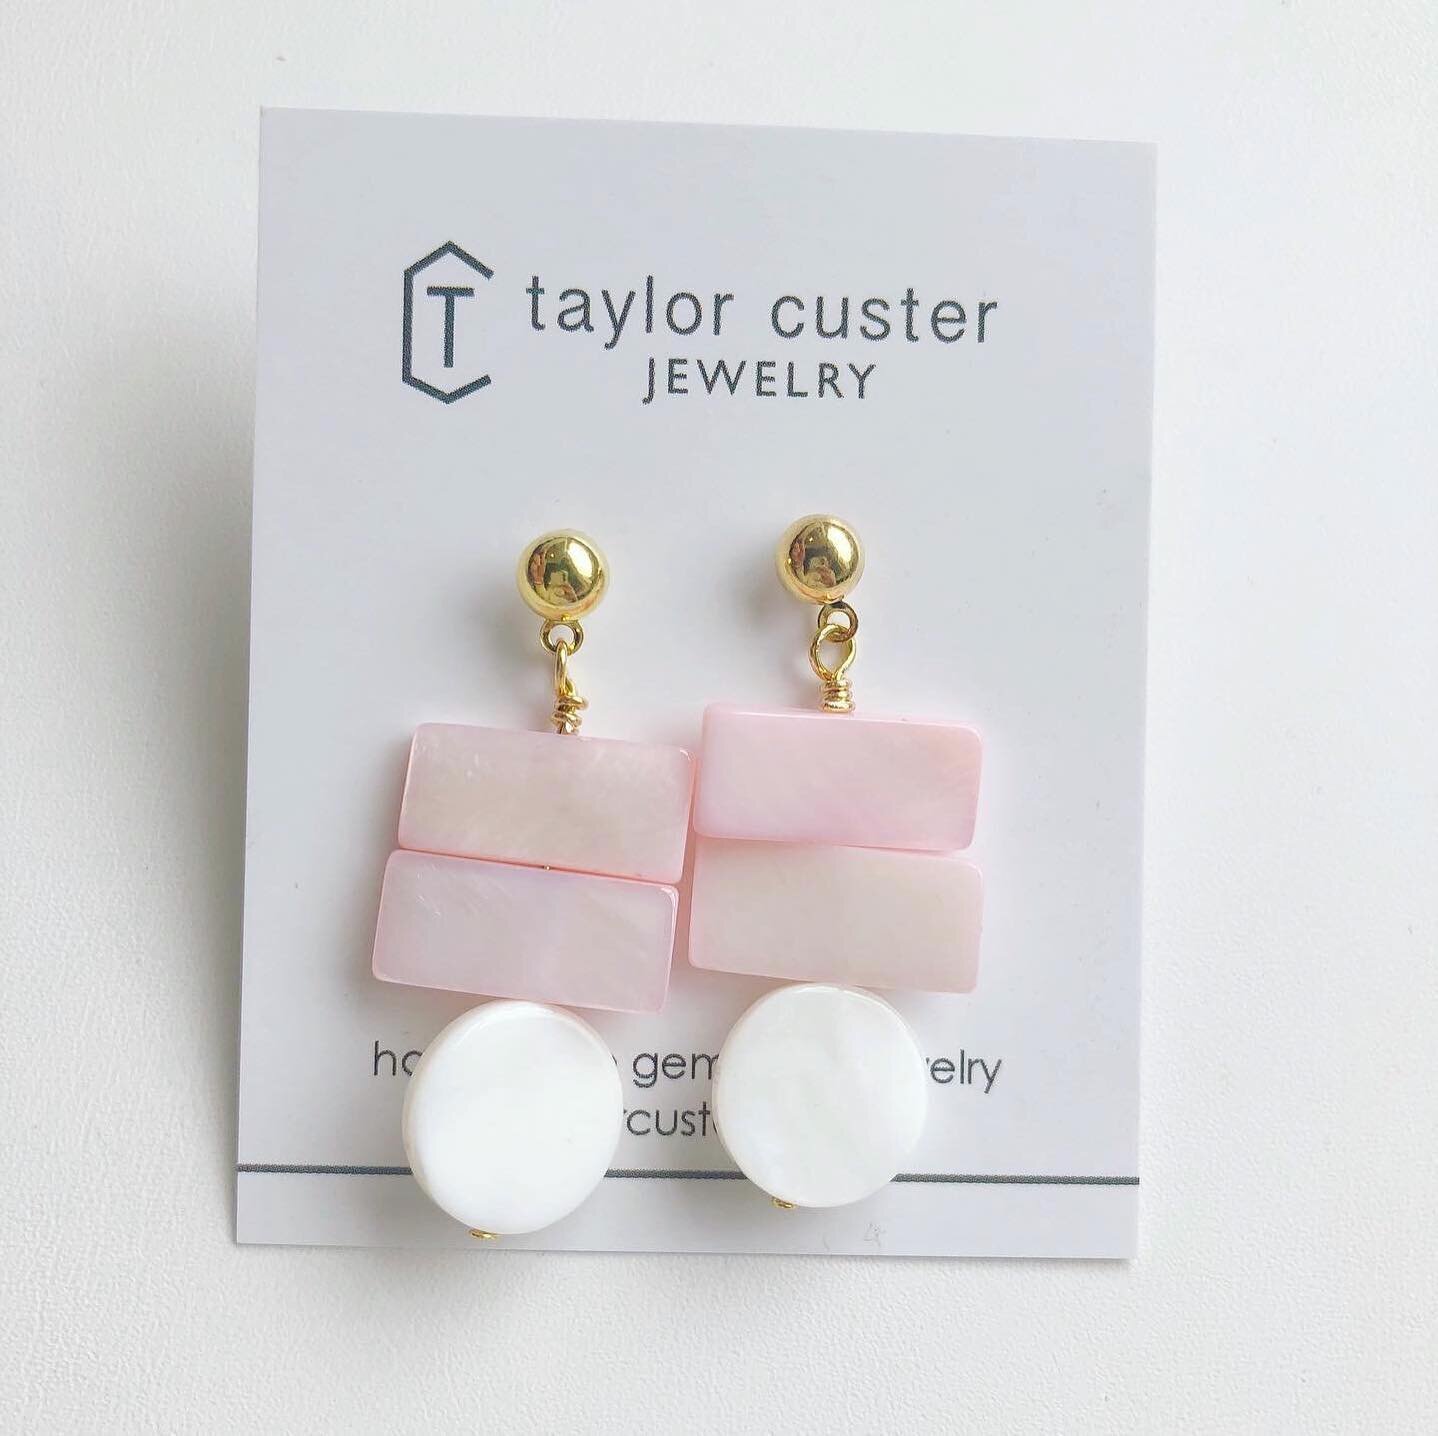 Pink and white mother of pearl earrings. These are on gold plated posts. $25. Comment sold to purchase.